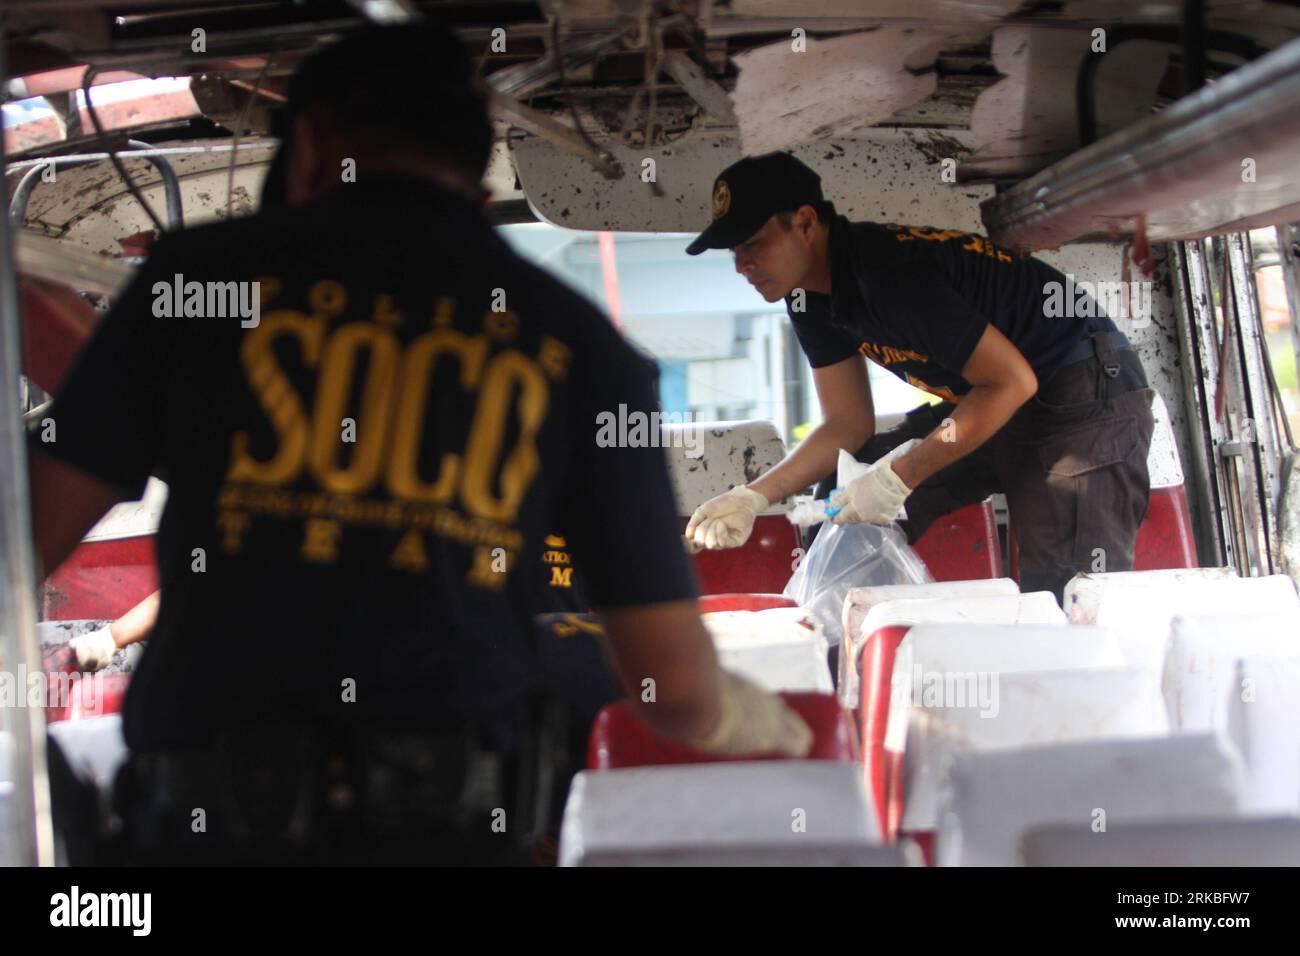 Bildnummer: 54553350  Datum: 21.10.2010  Copyright: imago/Xinhua (101021) -- MATALAM , Oct. 21, 2010 (Xinhua) -- Policemen investigate inside a bus in which an explosive device went off in Dalapitan, Matalam town in the province of North Cotabato, Philippines, Oct. 21, 2010. A bomb exploded inside a passenger bus Thursday in the southern Philippines, killing at least nine and injuring seven others. (Xinhua/Stringer) (zf) PHILIPPINES-MATALAM-BOMB EXPLOSION PUBLICATIONxNOTxINxCHN Gesellschaft Bombenanschlag Bus Attentat kbdig xsp 2010 quer     Bildnummer 54553350 Date 21 10 2010 Copyright Imago Stock Photo